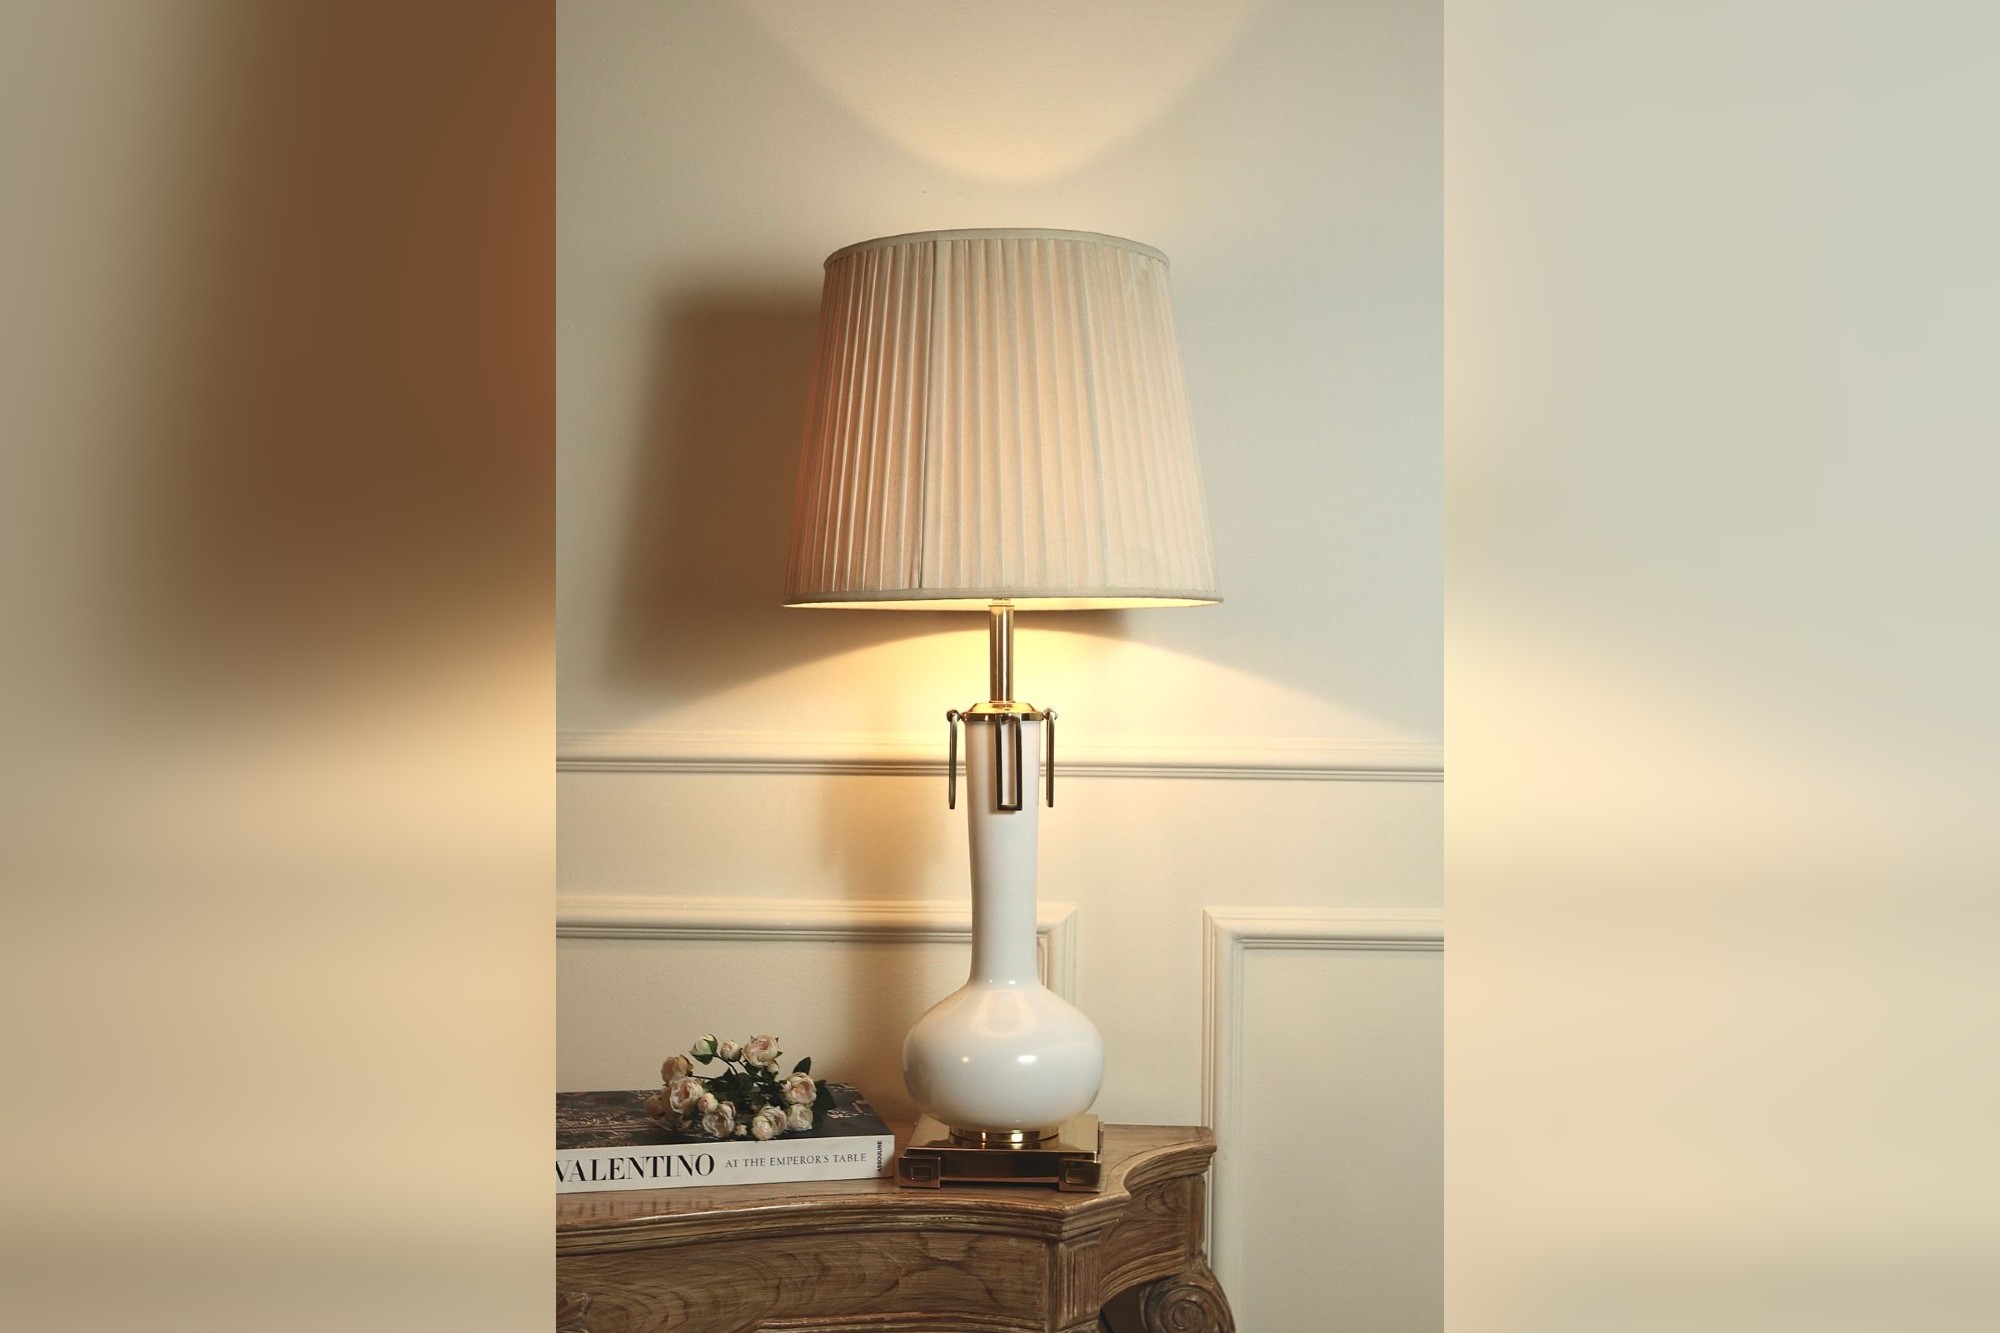 Exquisite lamp collection by Luxaddi